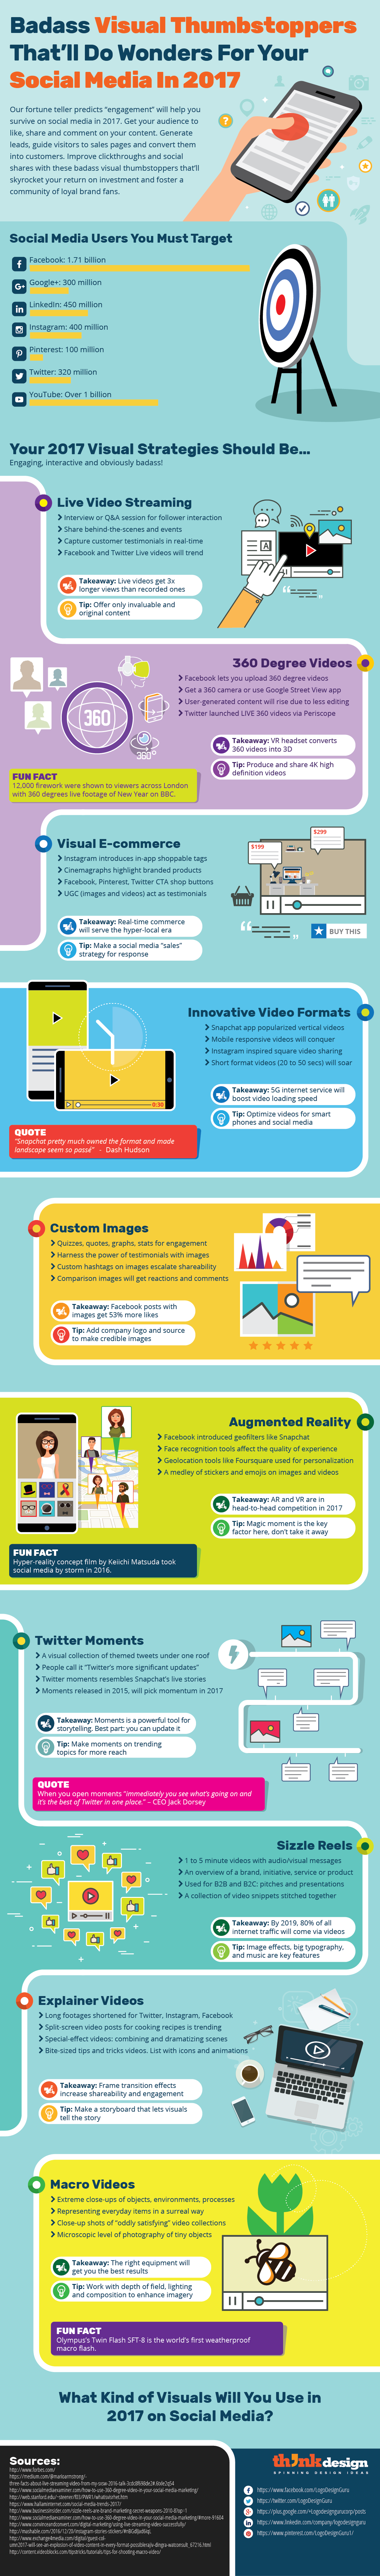 Badass Visual Thumbstoppers For Your Social Media In 2017 [Infographic]